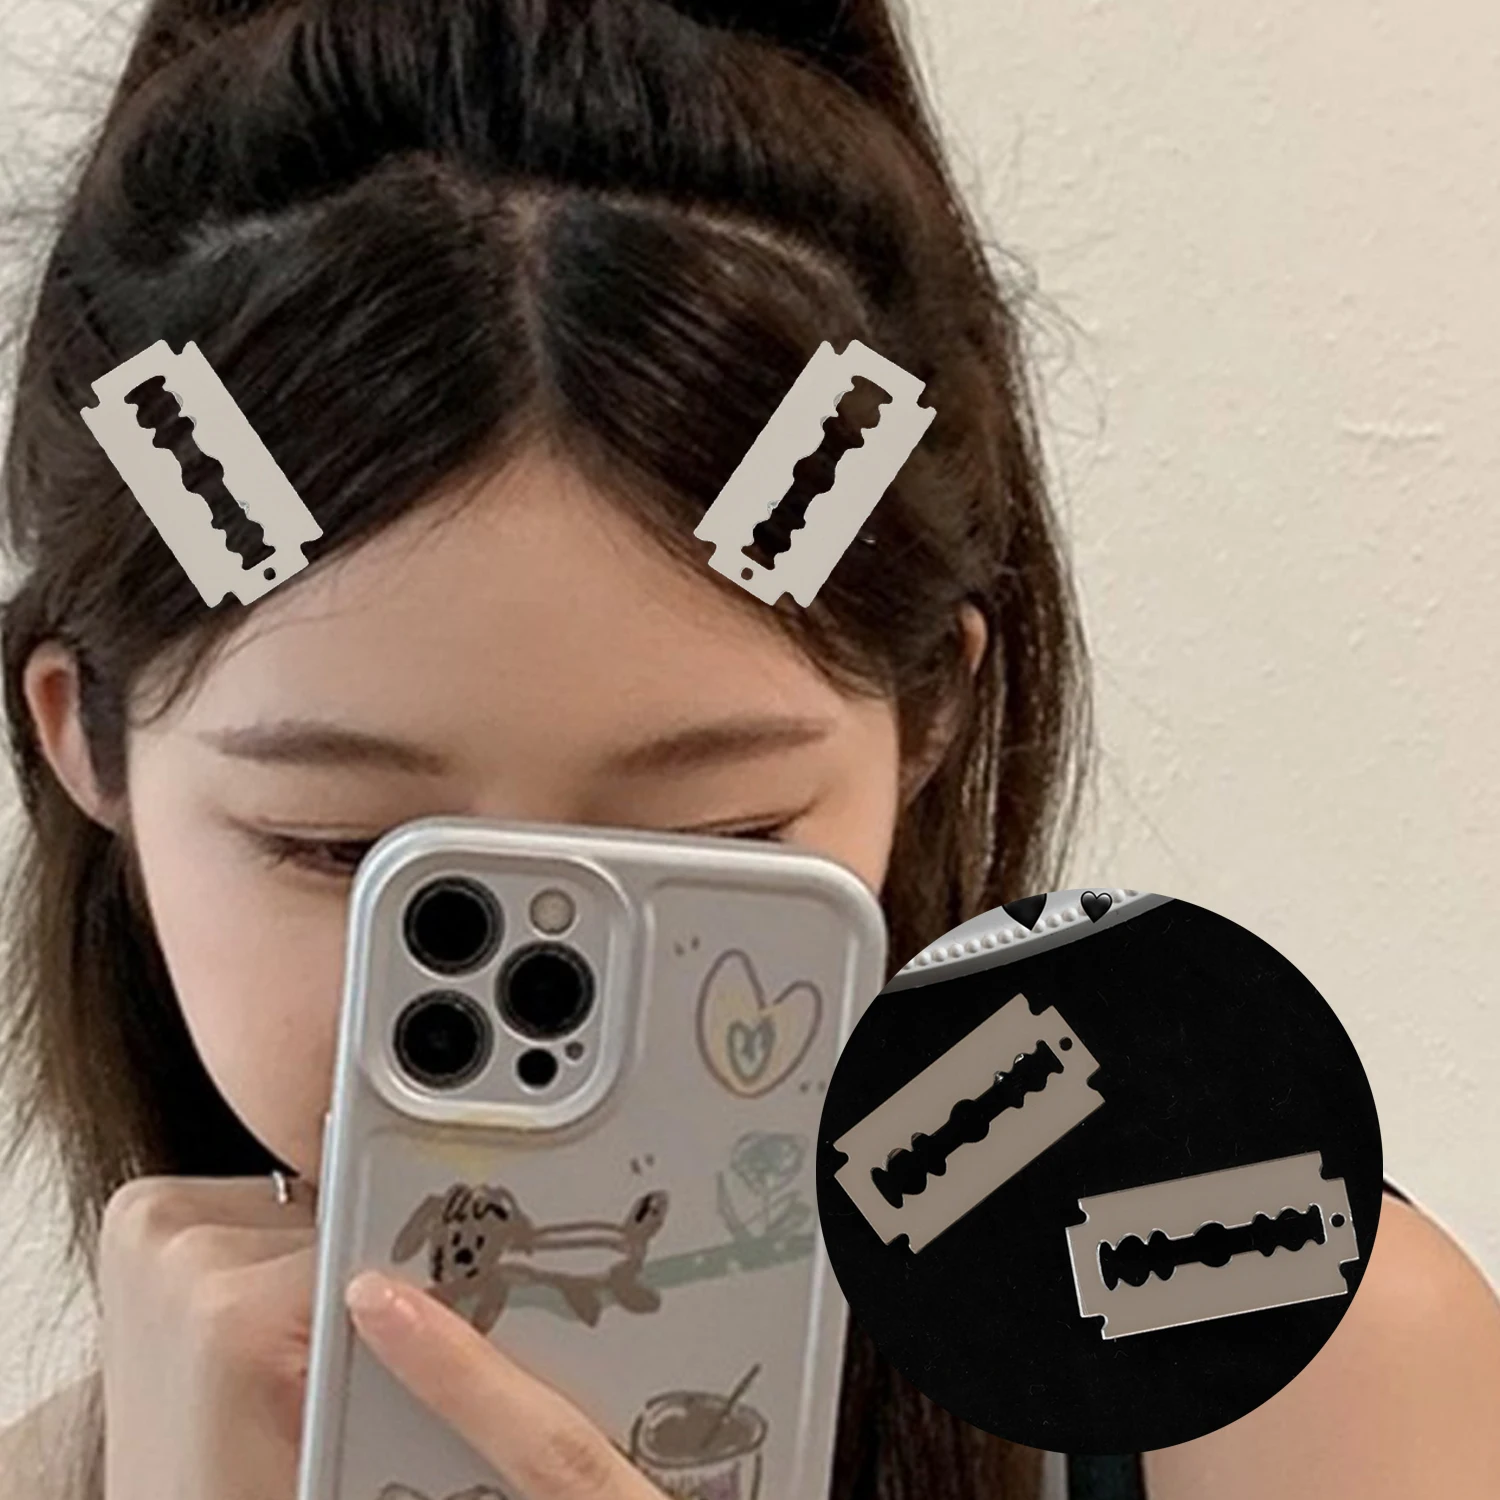 Lovely Simulated Blade Mini Hair Clip For Girls Headwear Fashion Light Luxury Women Creative Acrylic Hairpins Hair Accessories qunq fashion boys and girls summer light super soft anti odor anti slip cartoon indoor slippers casual lovely kids slippers